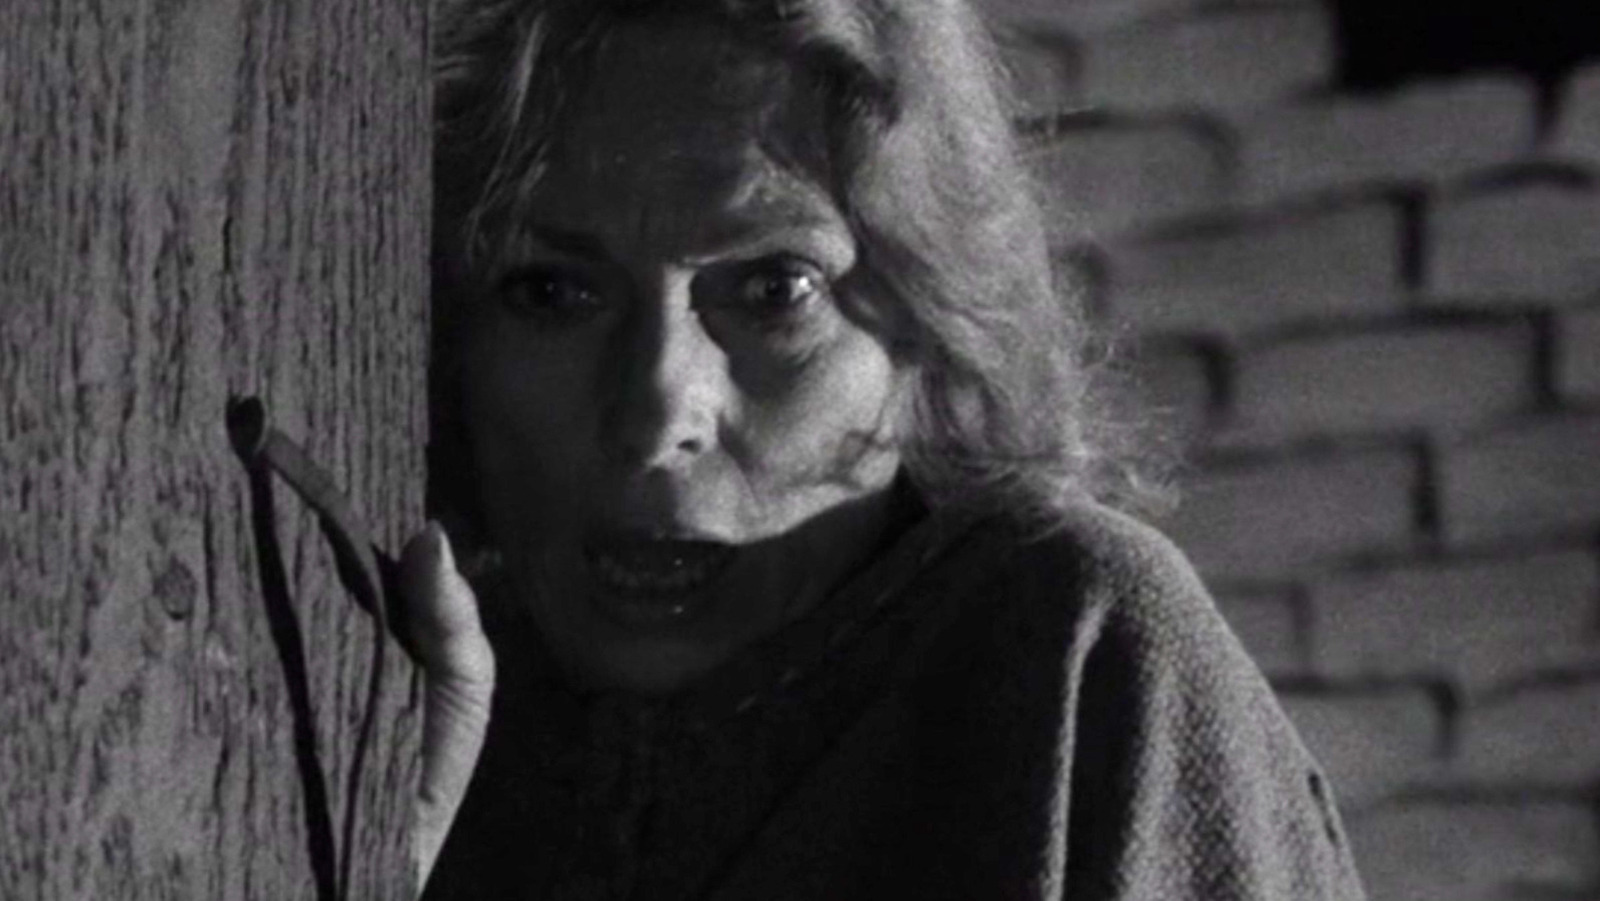 One Of The Scariest Episodes Of The Twilight Zone Had Almost No Dialogue